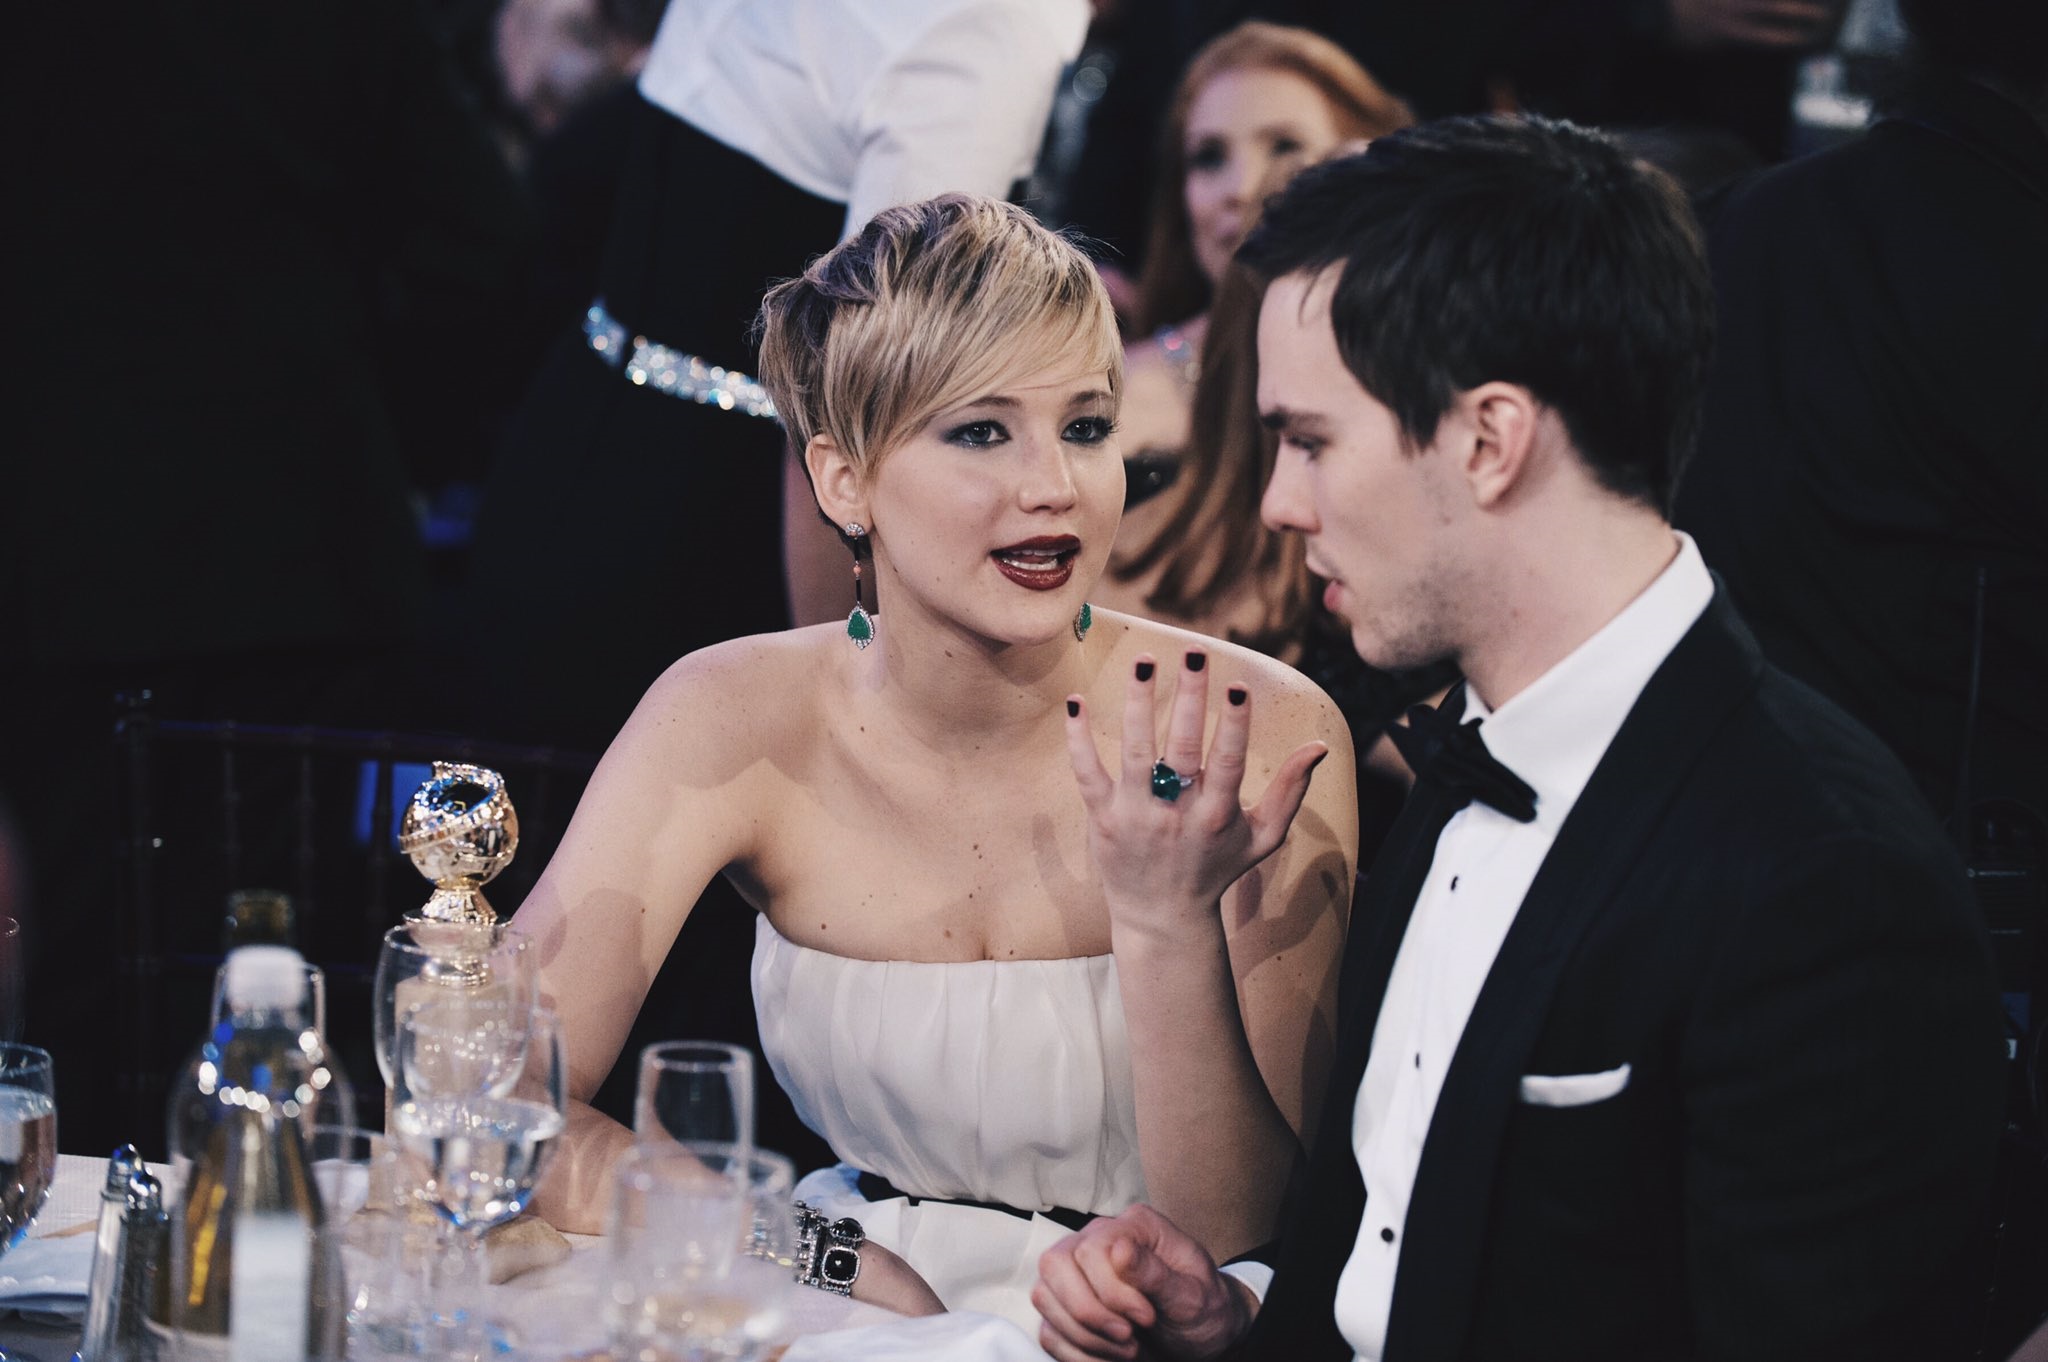 Nicholas Hoult and Jennifer Lawrence (Play / Twitter)